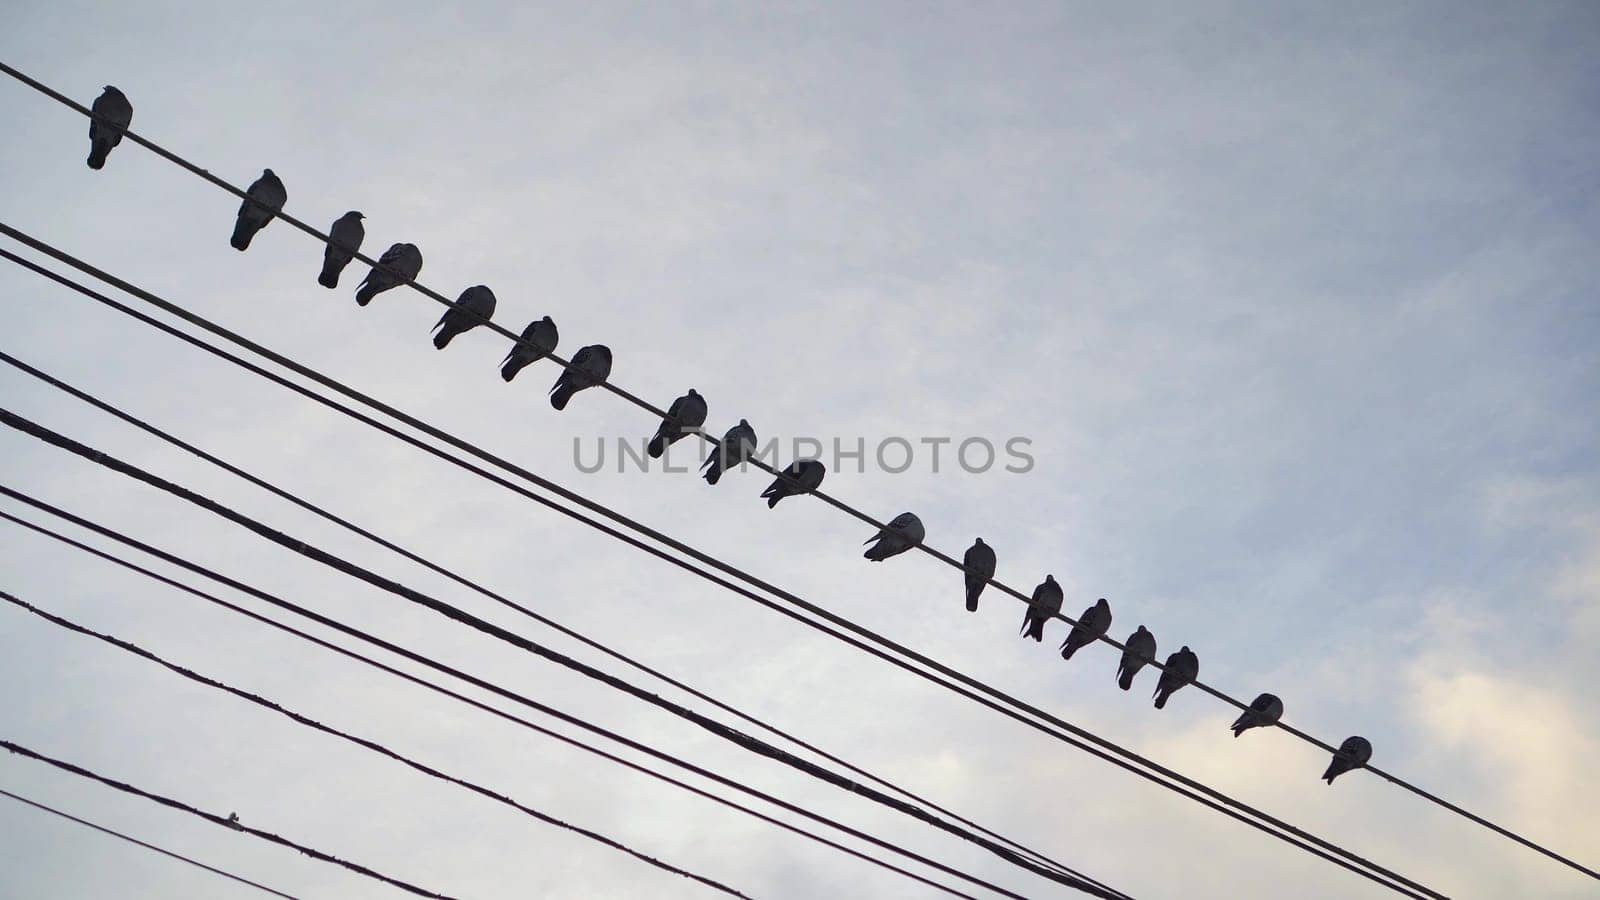 A flock of pigeons sit on wires against a blue cloudy sky. 4k